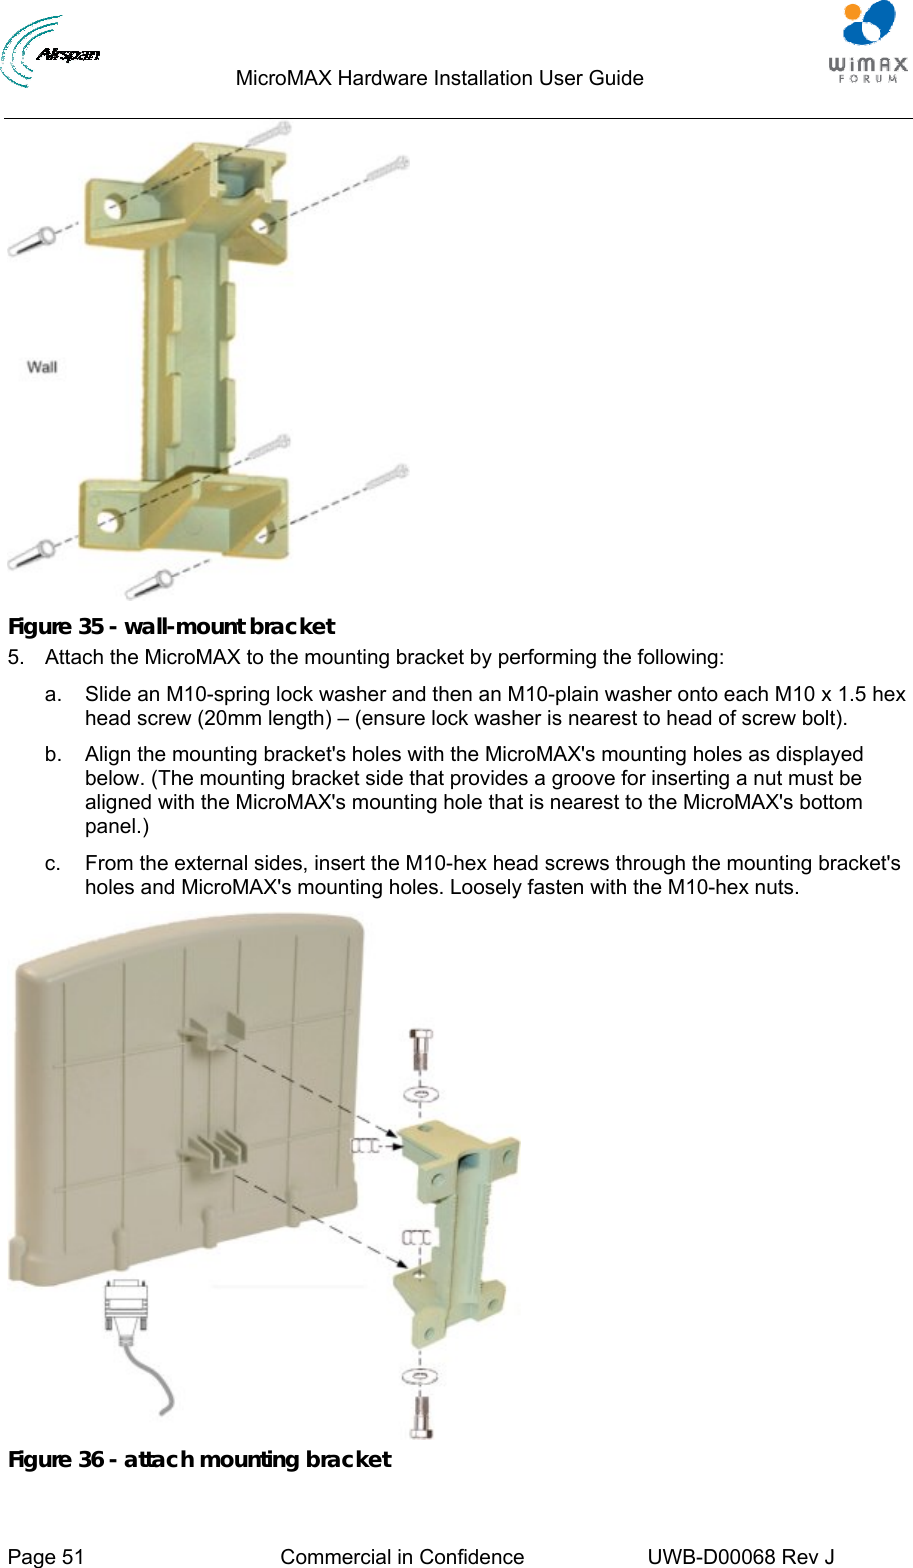                                  MicroMAX Hardware Installation User Guide     Page 51  Commercial in Confidence  UWB-D00068 Rev J    Figure 35 - wall-mount bracket 5.  Attach the MicroMAX to the mounting bracket by performing the following: a.  Slide an M10-spring lock washer and then an M10-plain washer onto each M10 x 1.5 hex head screw (20mm length) – (ensure lock washer is nearest to head of screw bolt). b.  Align the mounting bracket&apos;s holes with the MicroMAX&apos;s mounting holes as displayed below. (The mounting bracket side that provides a groove for inserting a nut must be aligned with the MicroMAX&apos;s mounting hole that is nearest to the MicroMAX&apos;s bottom panel.) c.  From the external sides, insert the M10-hex head screws through the mounting bracket&apos;s holes and MicroMAX&apos;s mounting holes. Loosely fasten with the M10-hex nuts.  Figure 36 - attach mounting bracket 